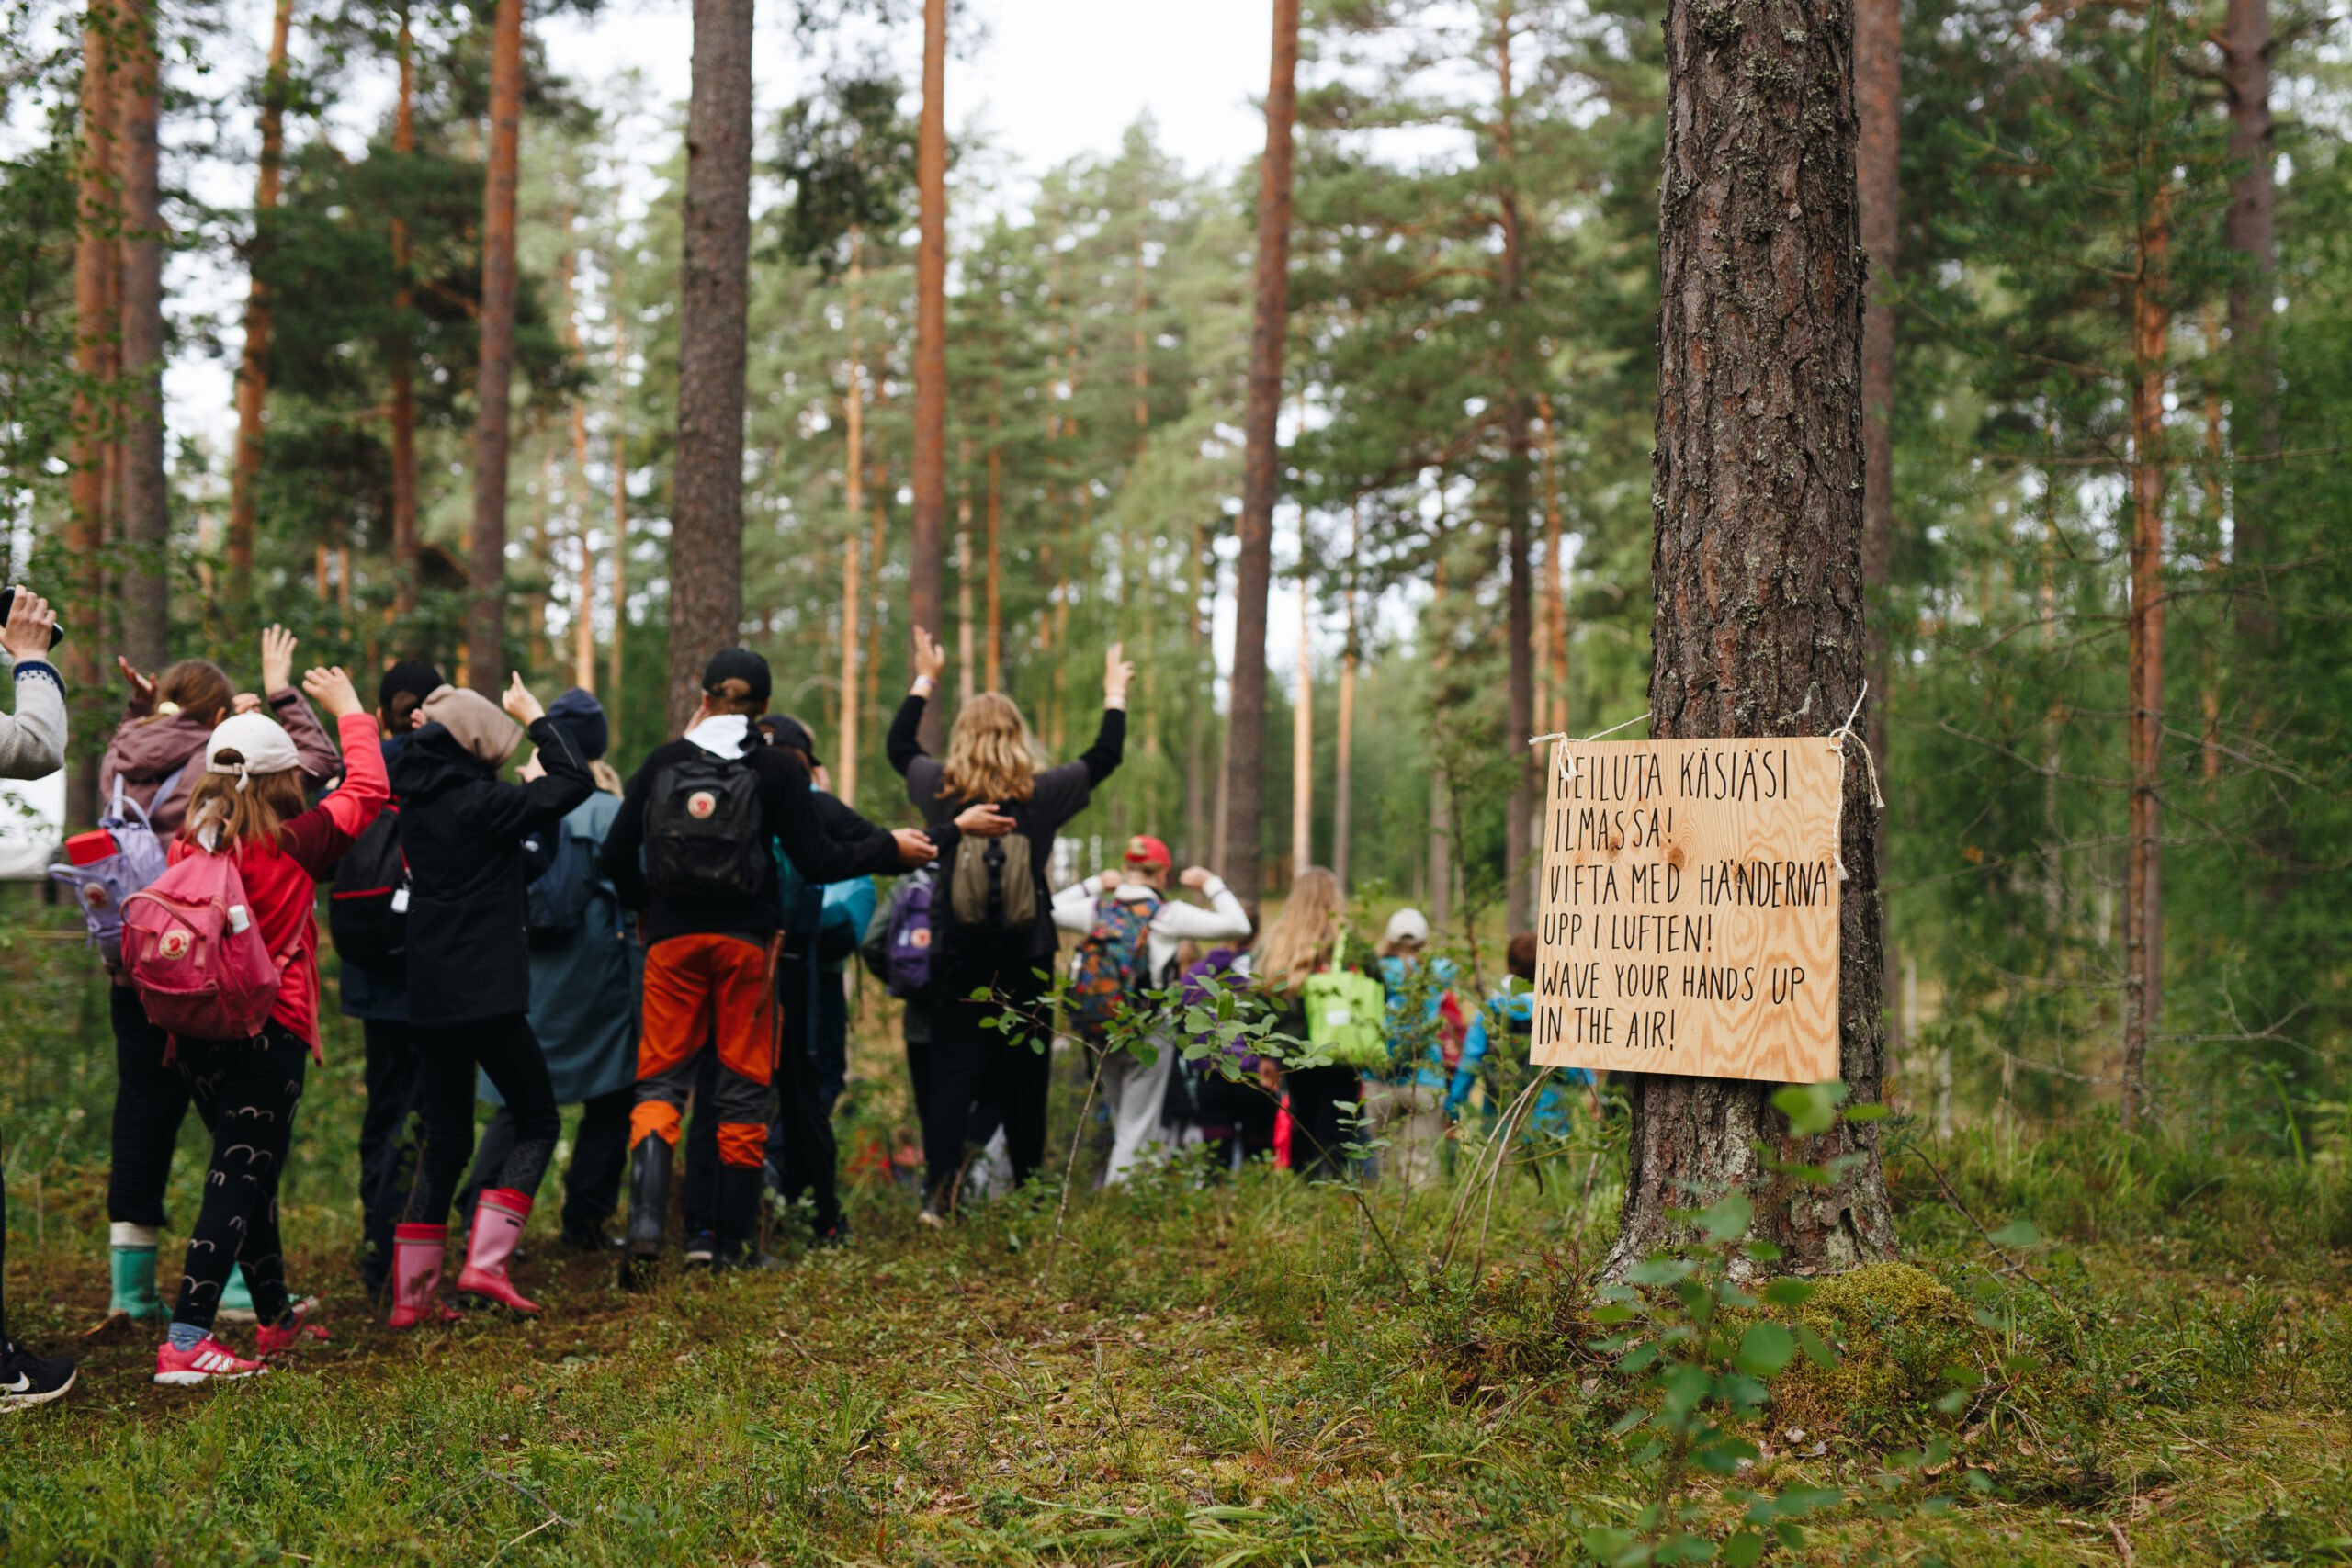 A group of children in a forest.